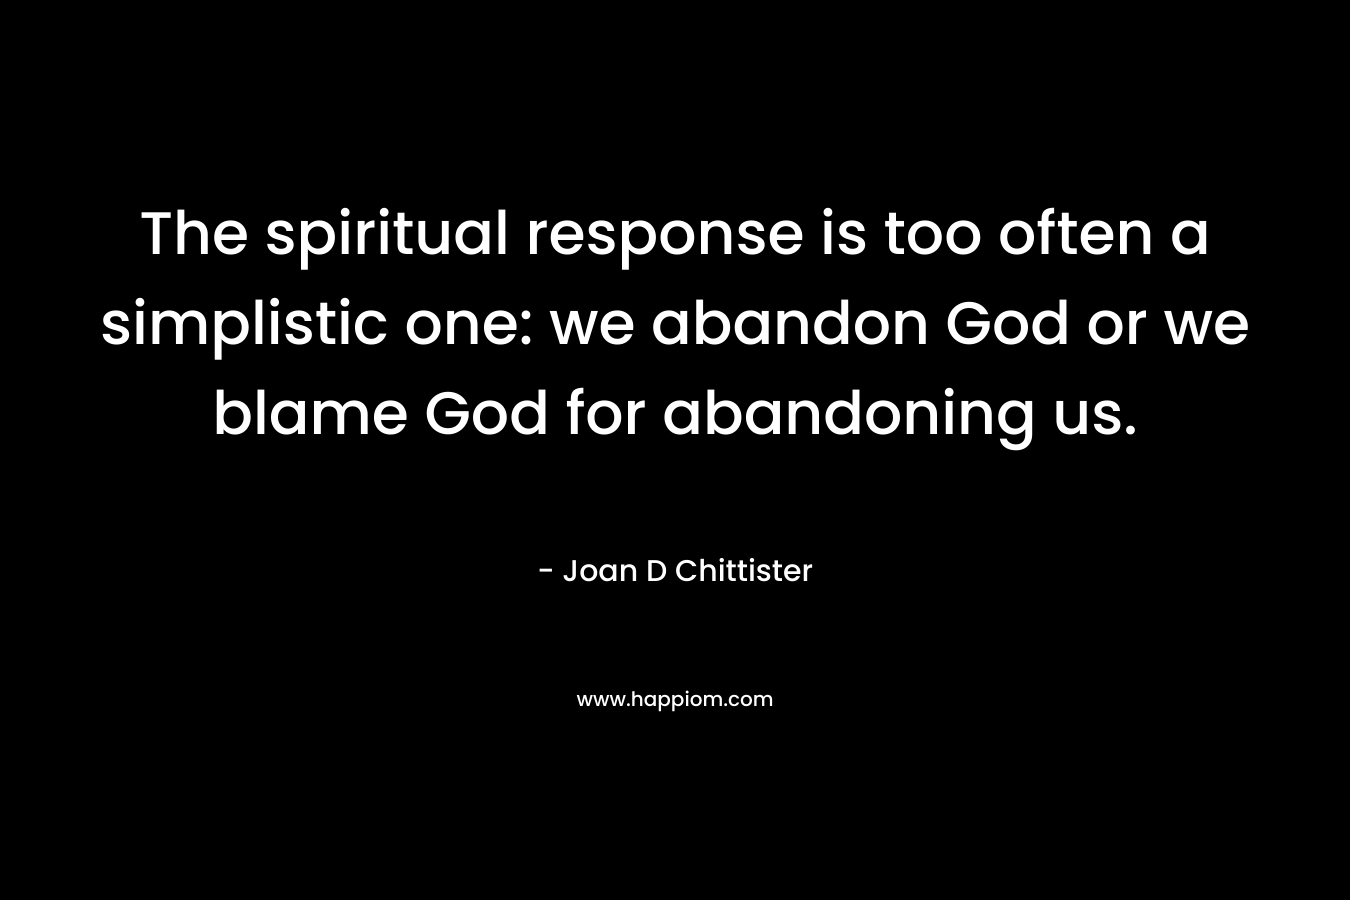 The spiritual response is too often a simplistic one: we abandon God or we blame God for abandoning us.